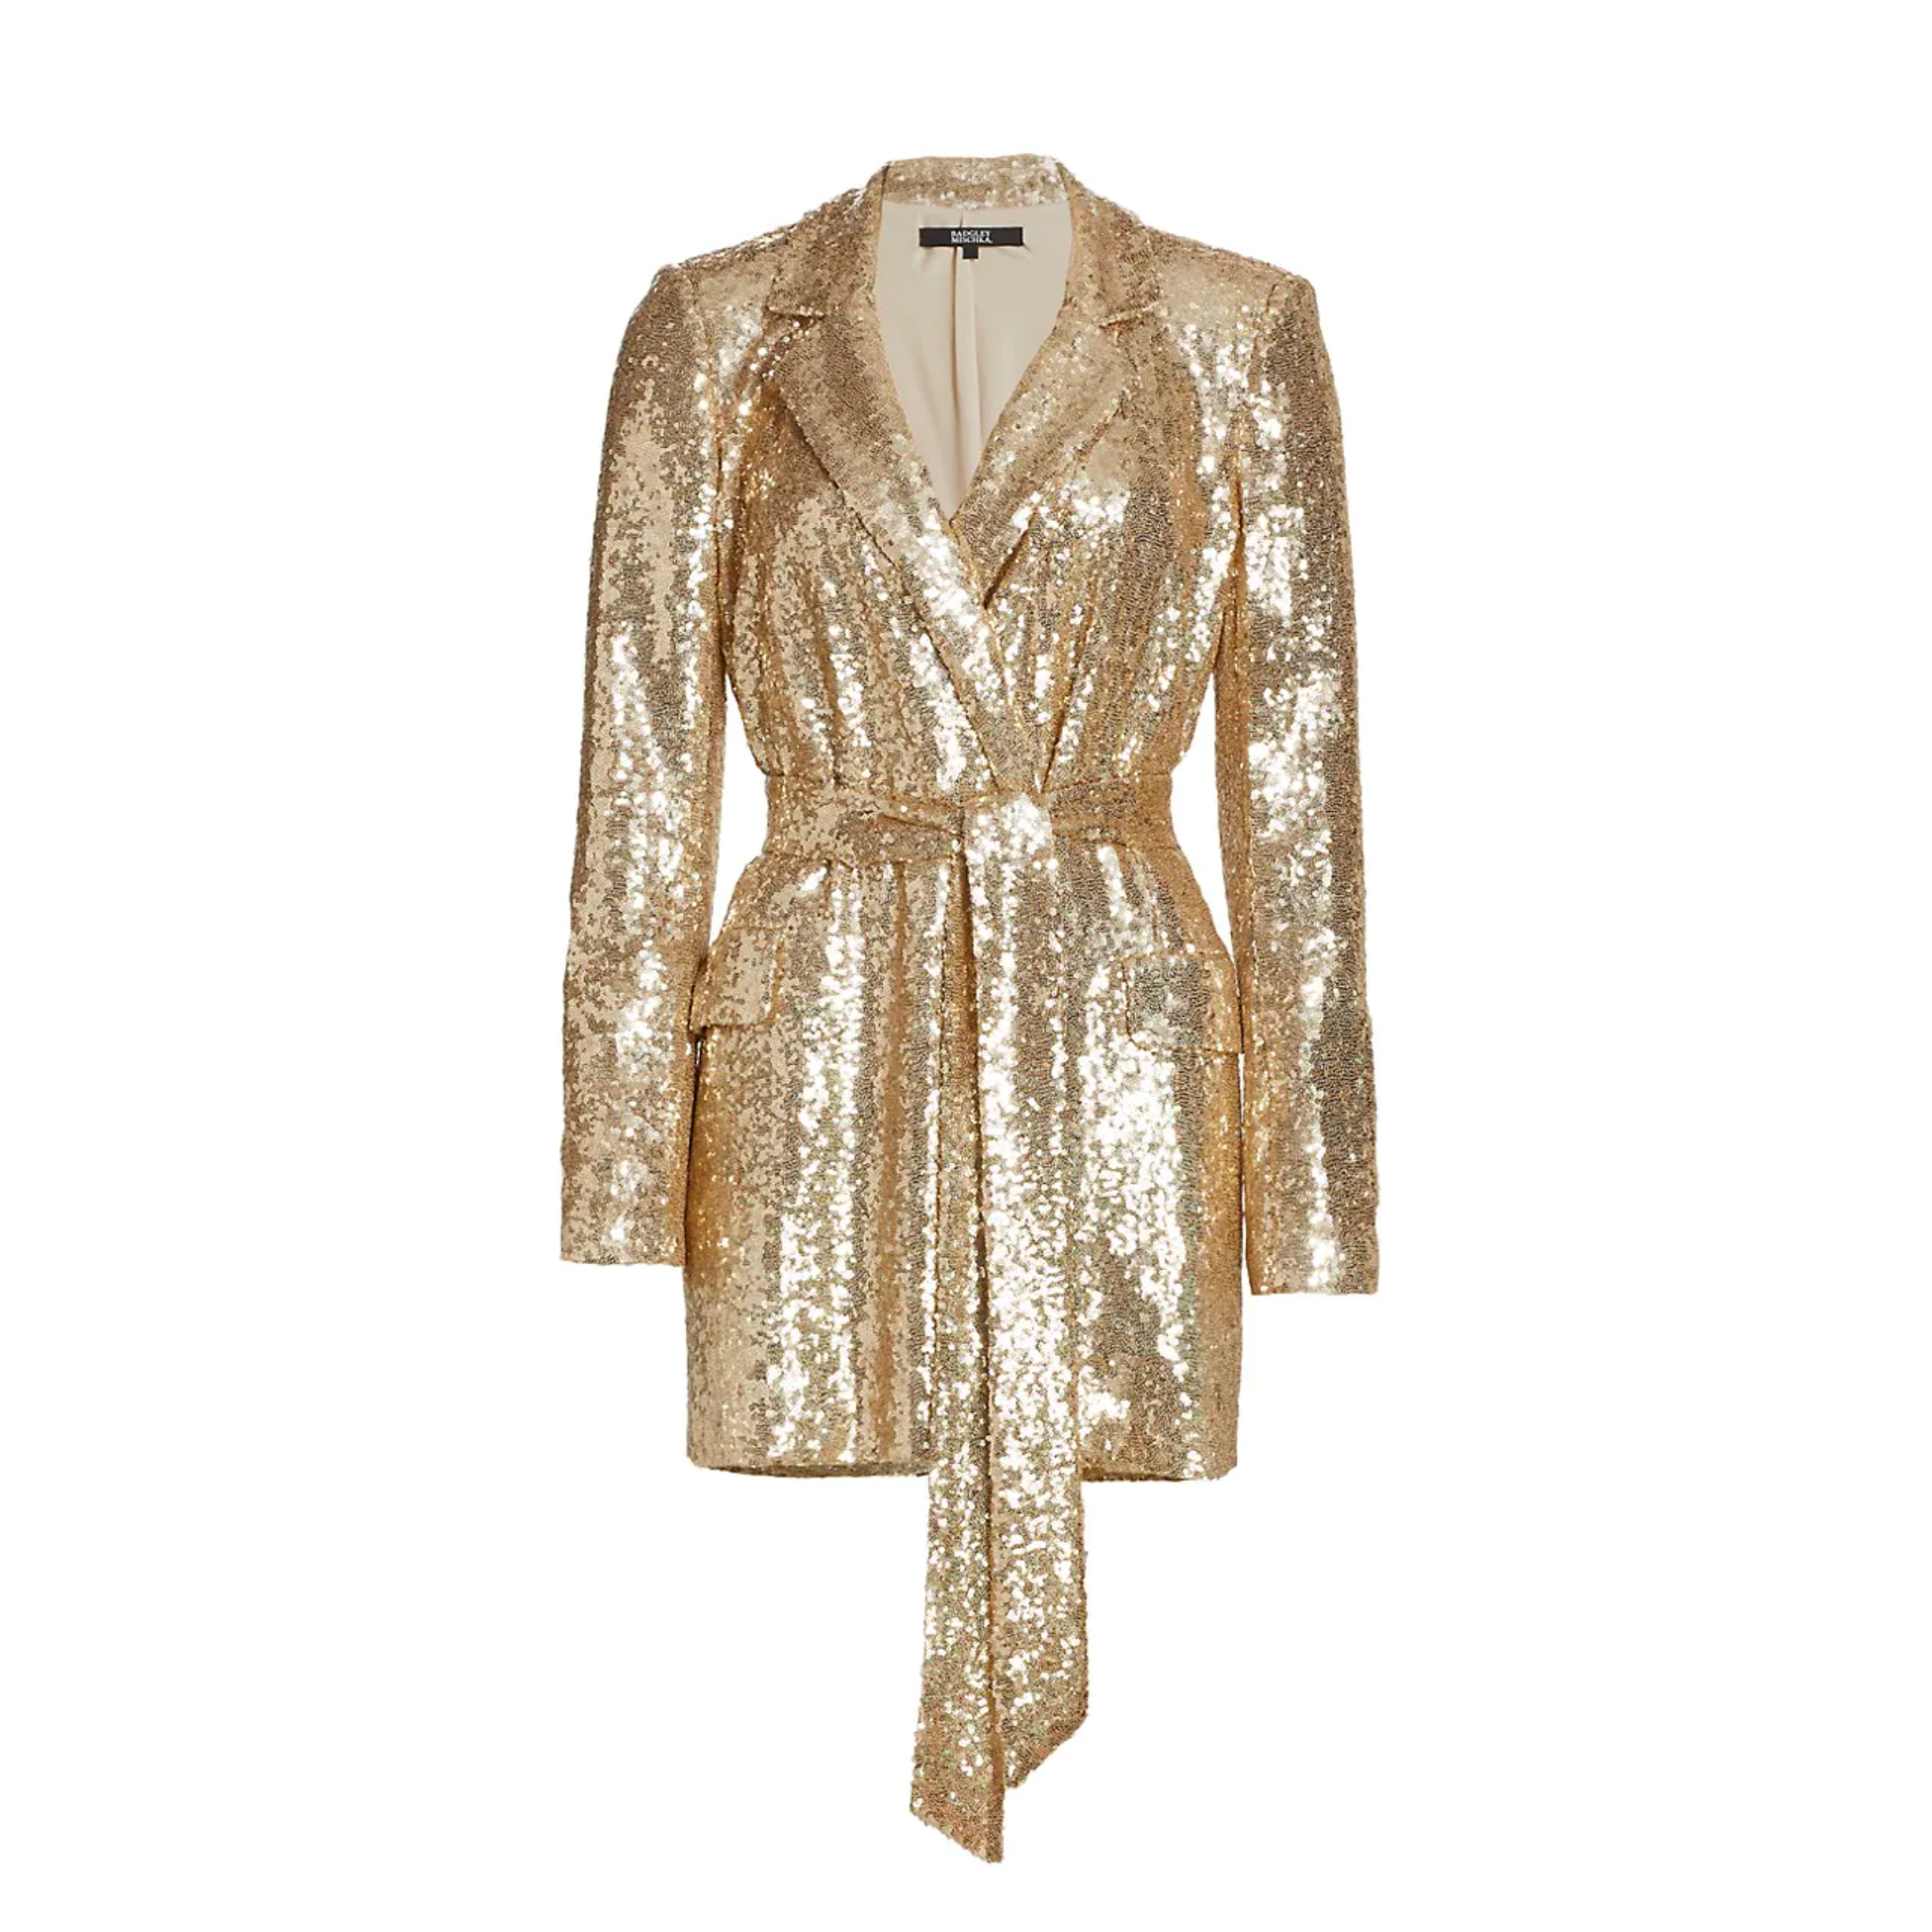 Sequin Blazer With Self Sash in Champagne Gold